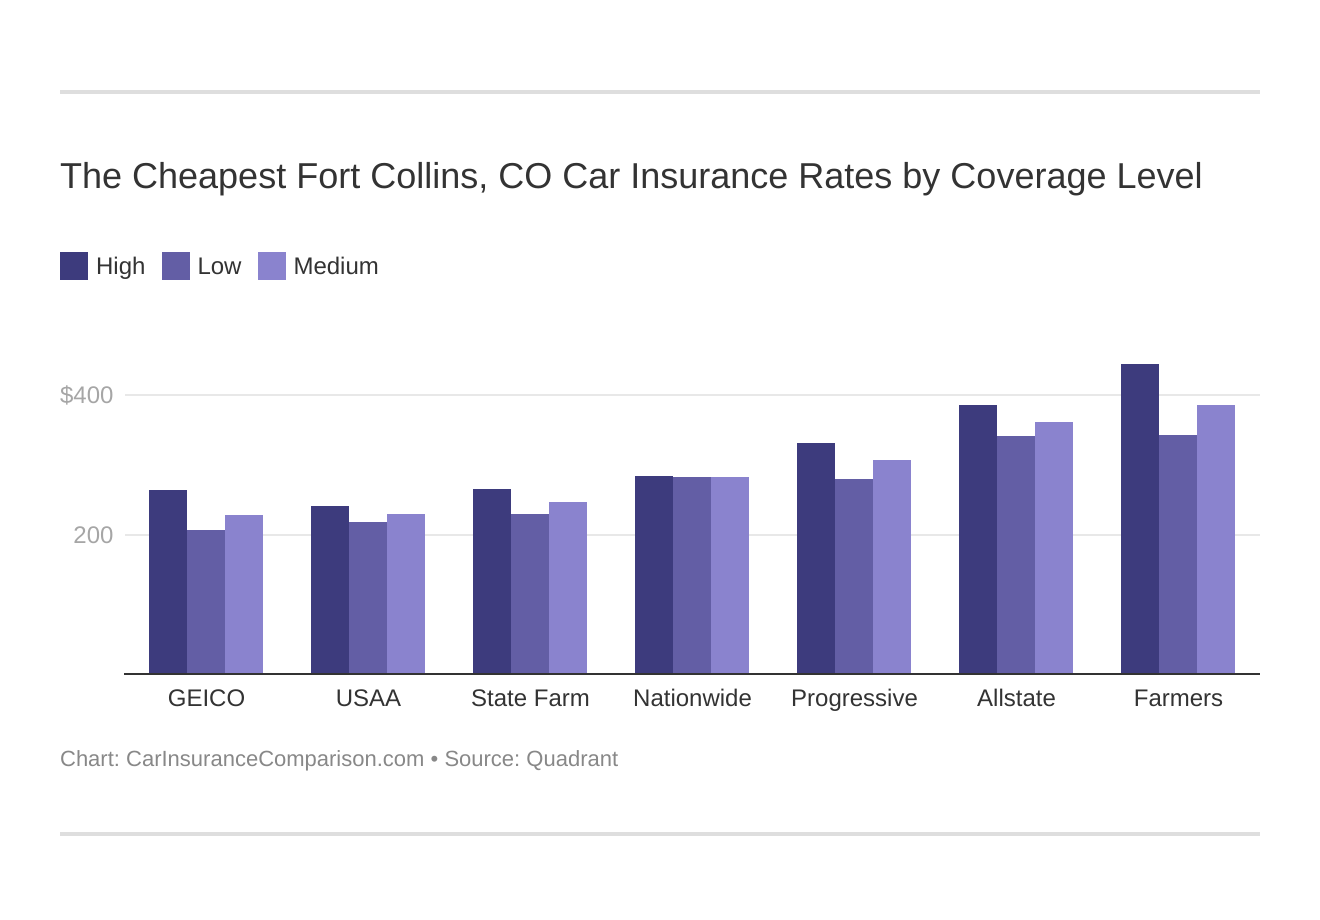 The Cheapest Fort Collins, CO Car Insurance Rates by Coverage Level